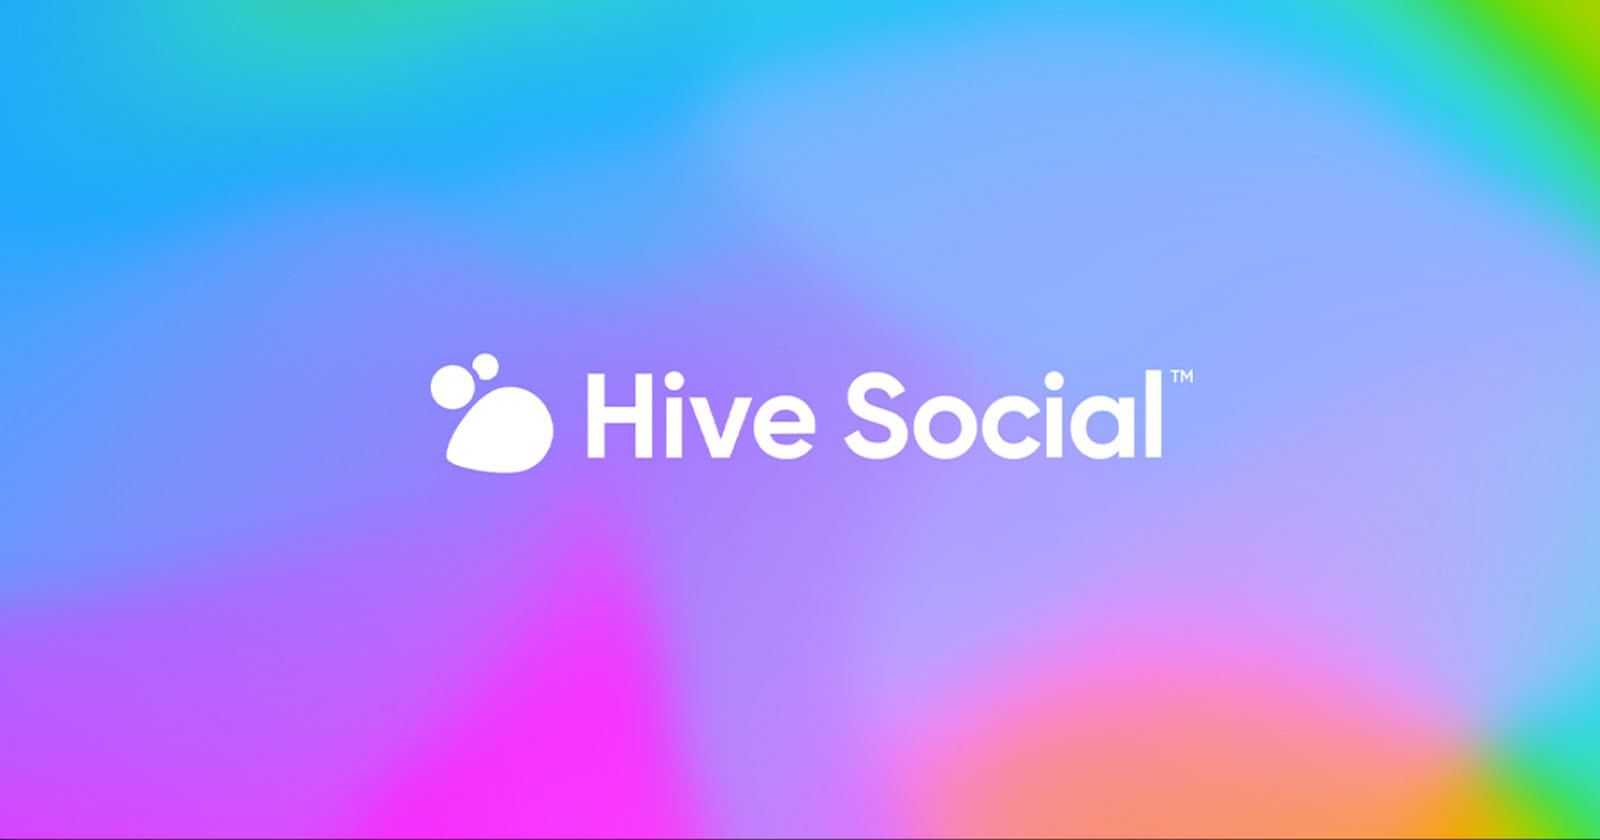 Hive Social, a Twitter and Instagram Alternative, is Exploding in Popularity